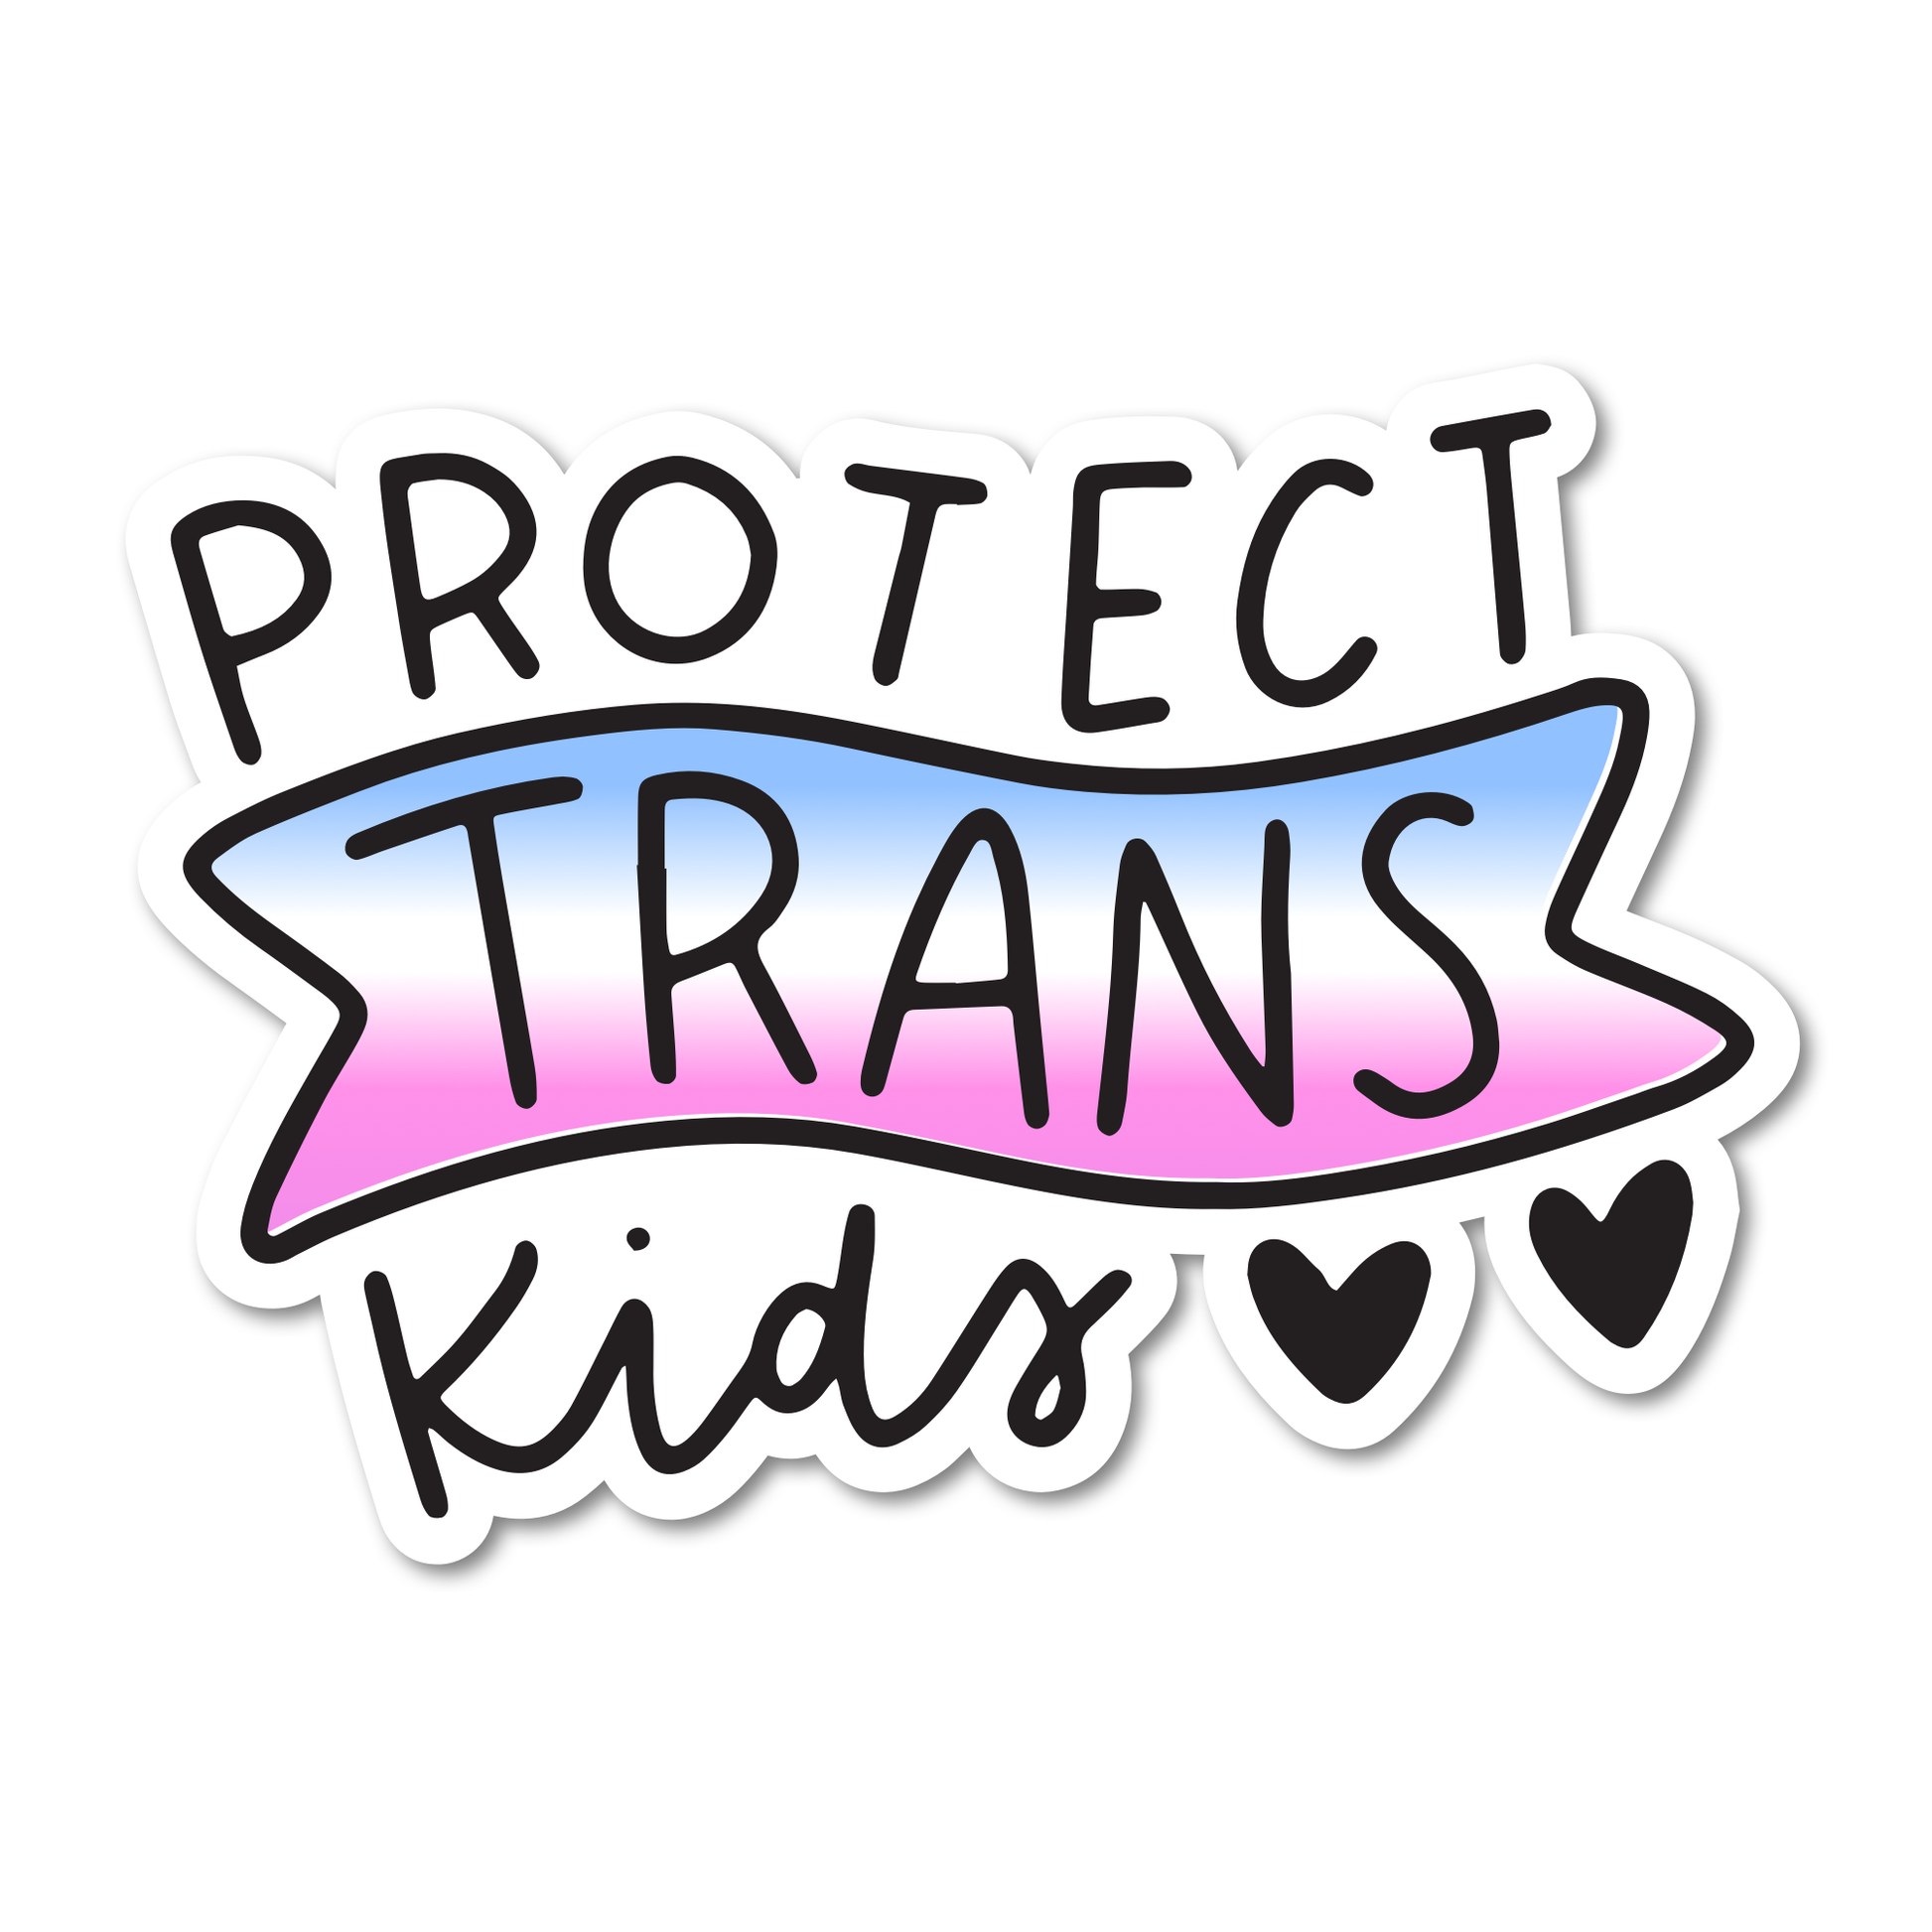 Protect Trans Kids written on top of trans colors premium quality vinyl sticker